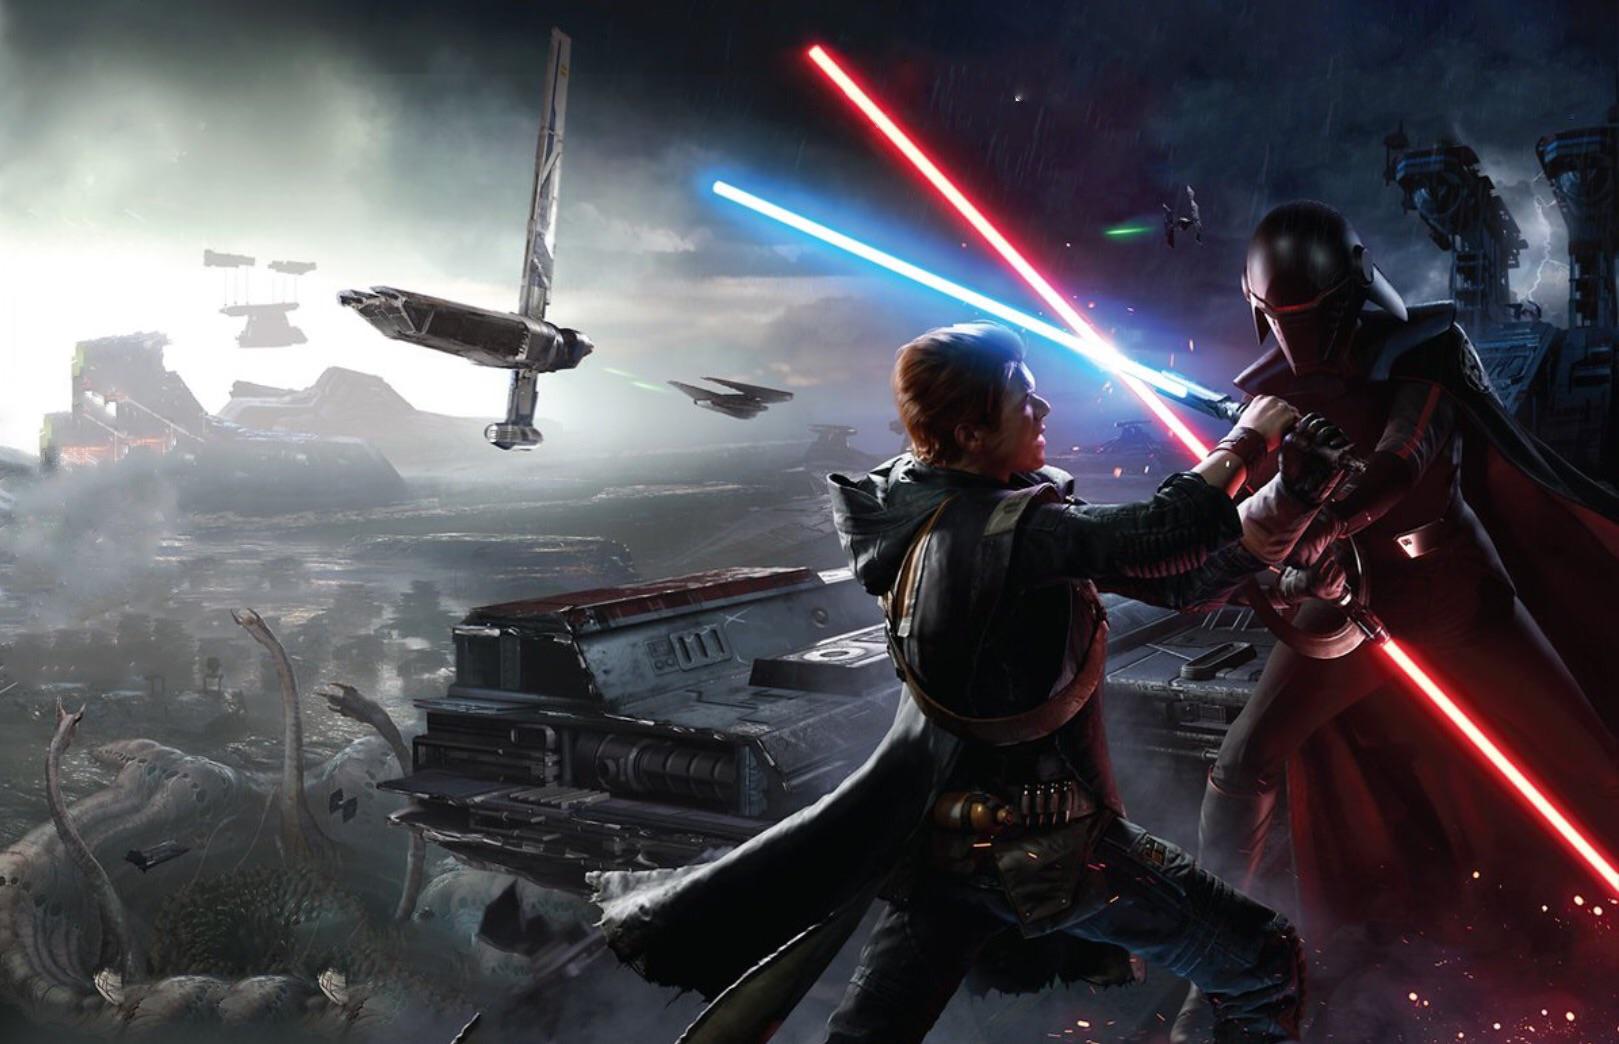 The Star Wars Jedi : Fallen Order devs talk about the Protagonist, Disney and locations